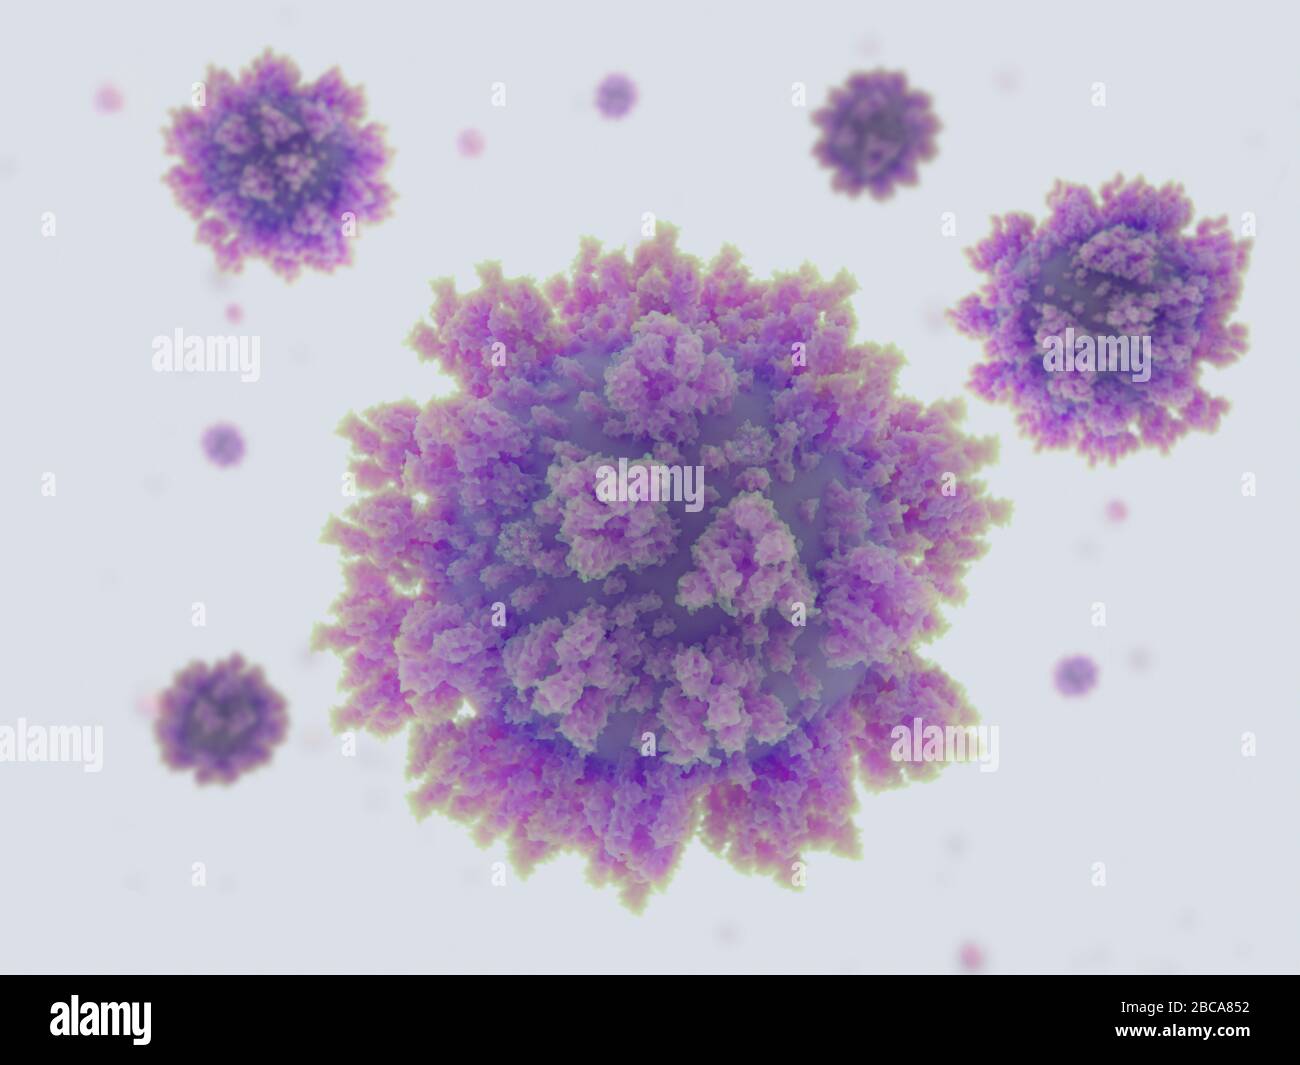 Covid-19 coronavirus particles, illustration. The SARS-CoV-2 coronavirus was first identified in Wuhan, China, in December 2019. It is an enveloped RNA (ribonucleic acid) virus. Within the membrane are spike proteins (large protrusions) as well as membrane proteins and envelope proteins. SARS-CoV-2 causes the respiratory infection Covid-19, which can lead to fatal pneumonia. As of March 2020, the virus has spread to many countries worldwide and has been declared a pandemic. Hundreds of thousands have been infected with tens of thousands of deaths. Stock Photo